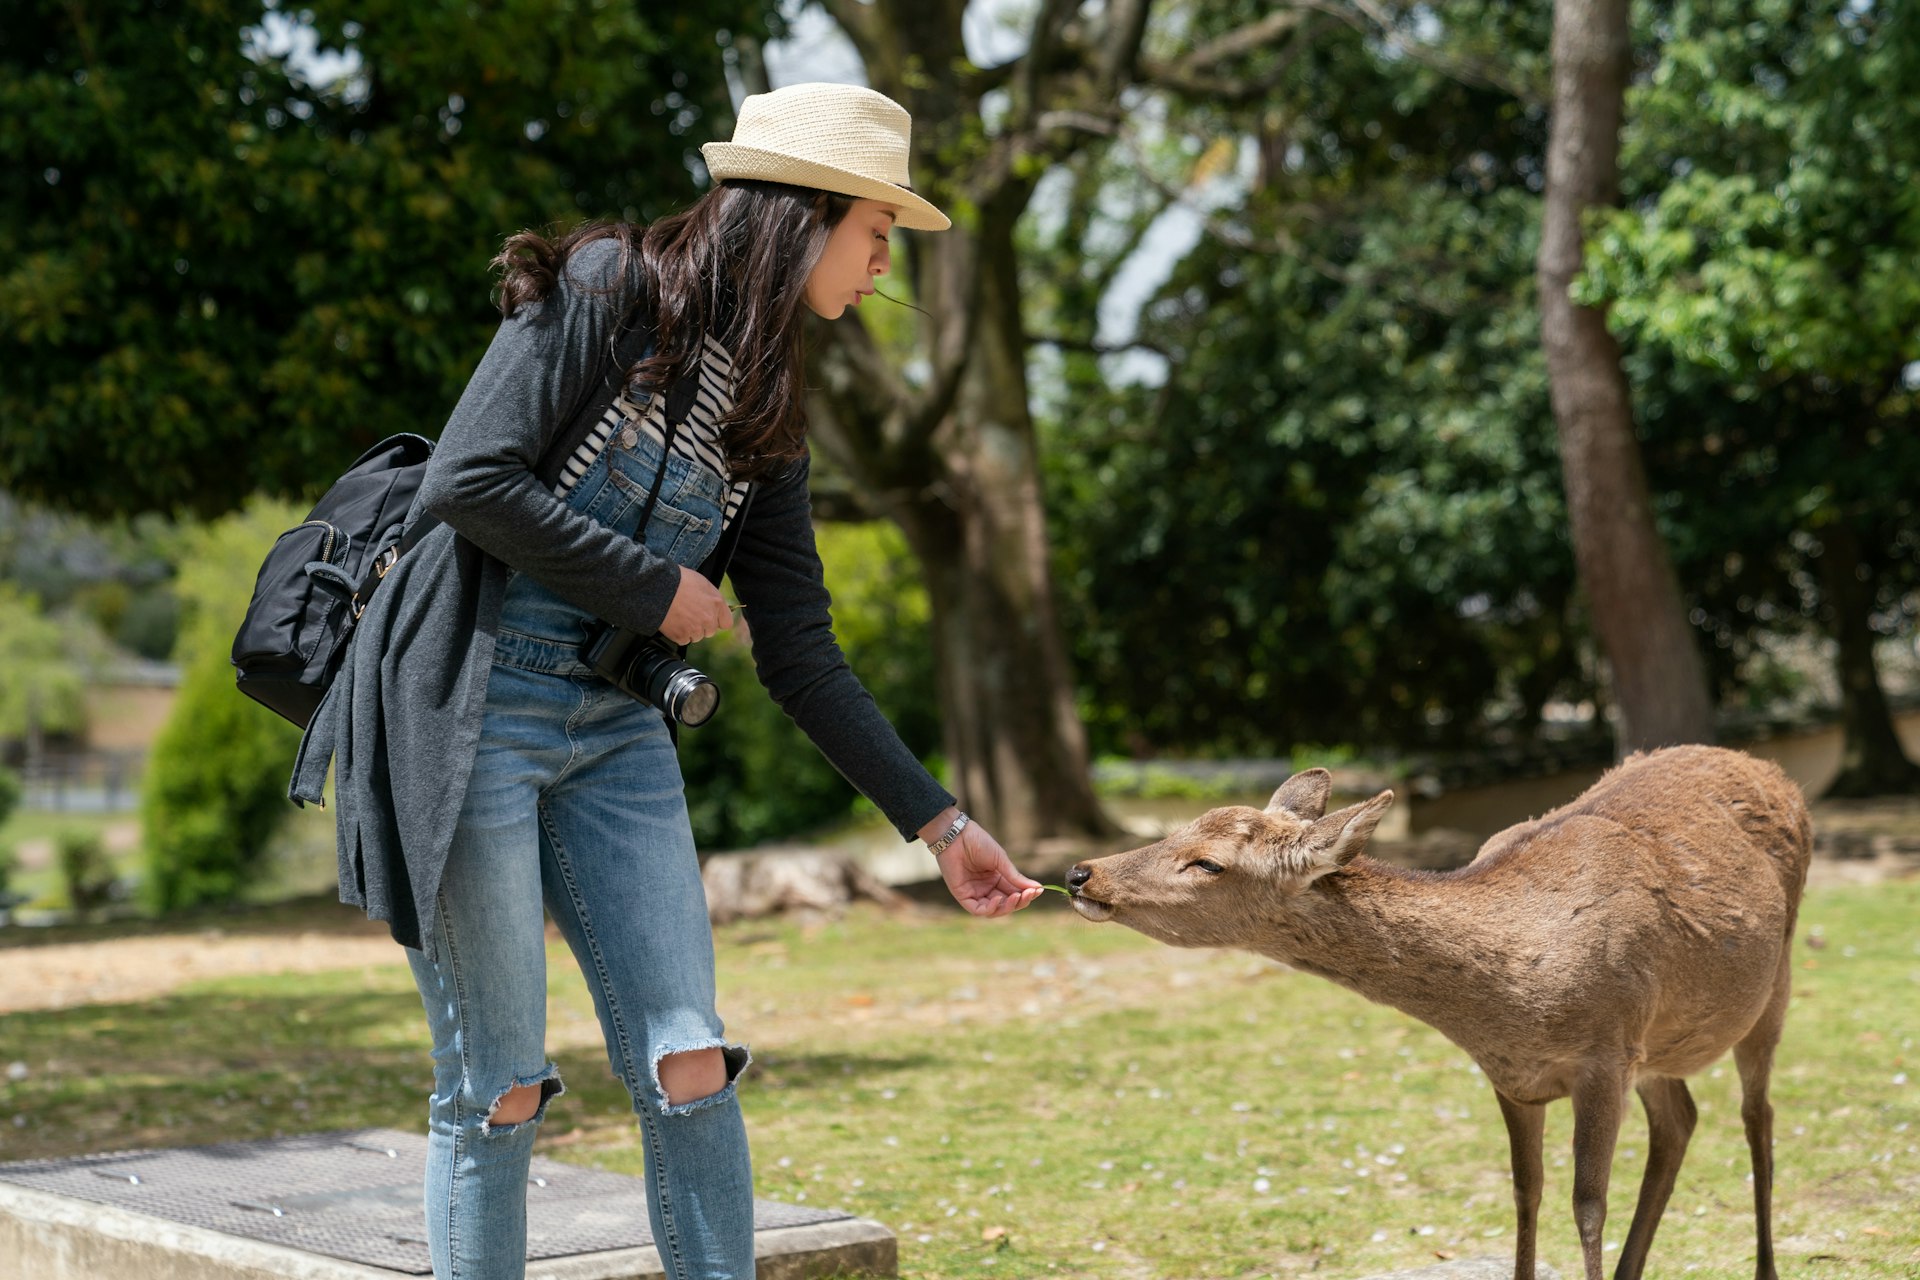 A woman feeding a wild deer some grass in the park at Tōdai-ji Buddhist temple in Nara, Japan, on a sunny day.